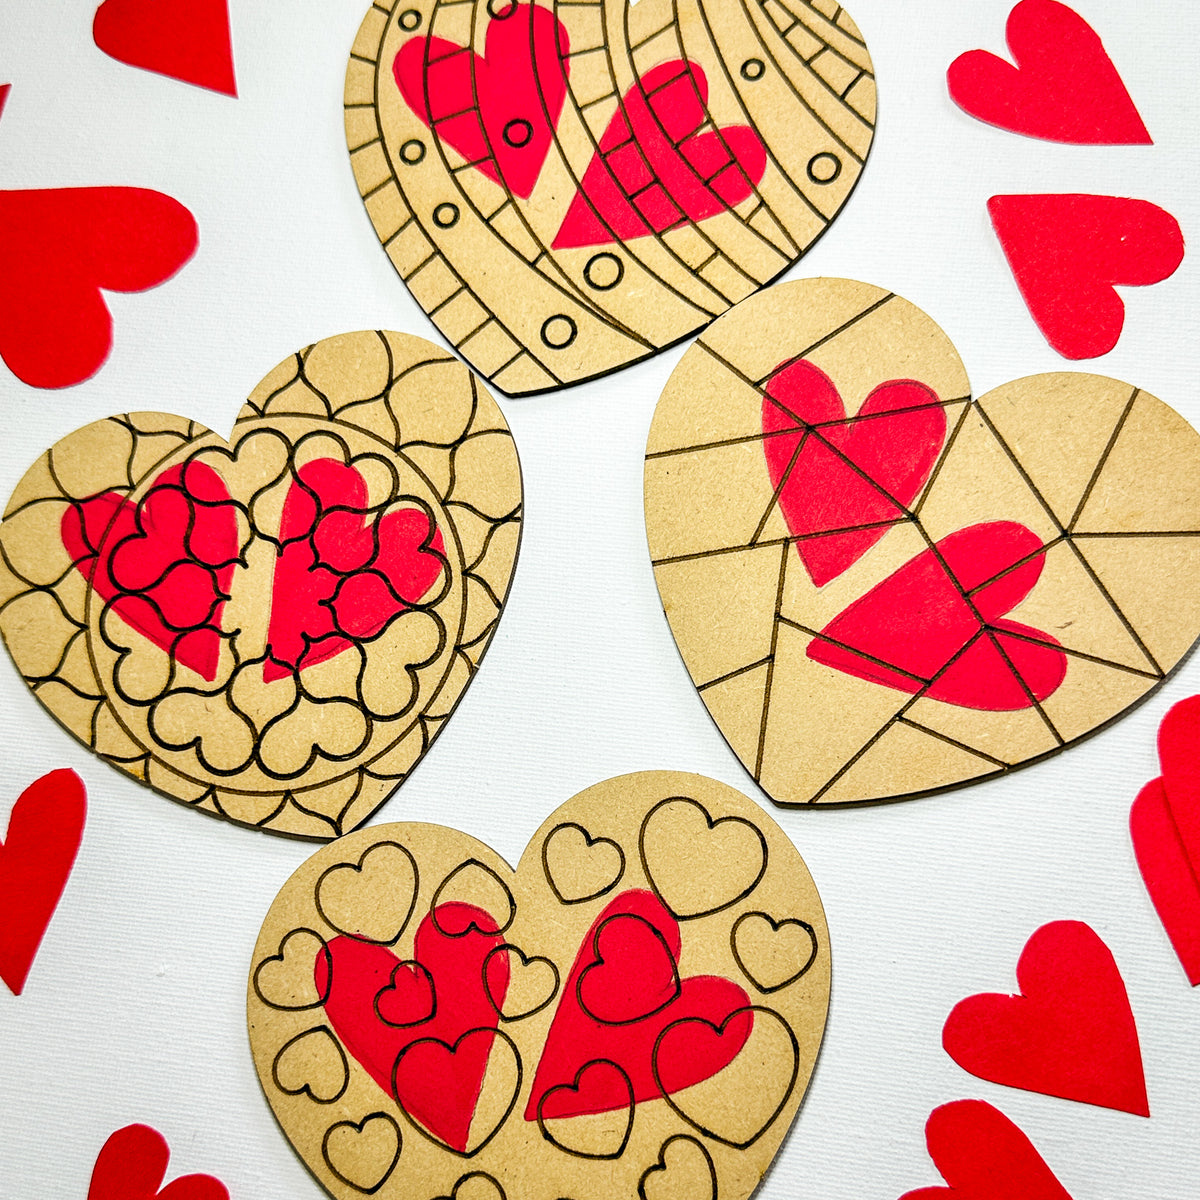 Colourful Hearts Valentine&#39;s Day Gift Set - 4 Love Heart coasters with acrylic markers